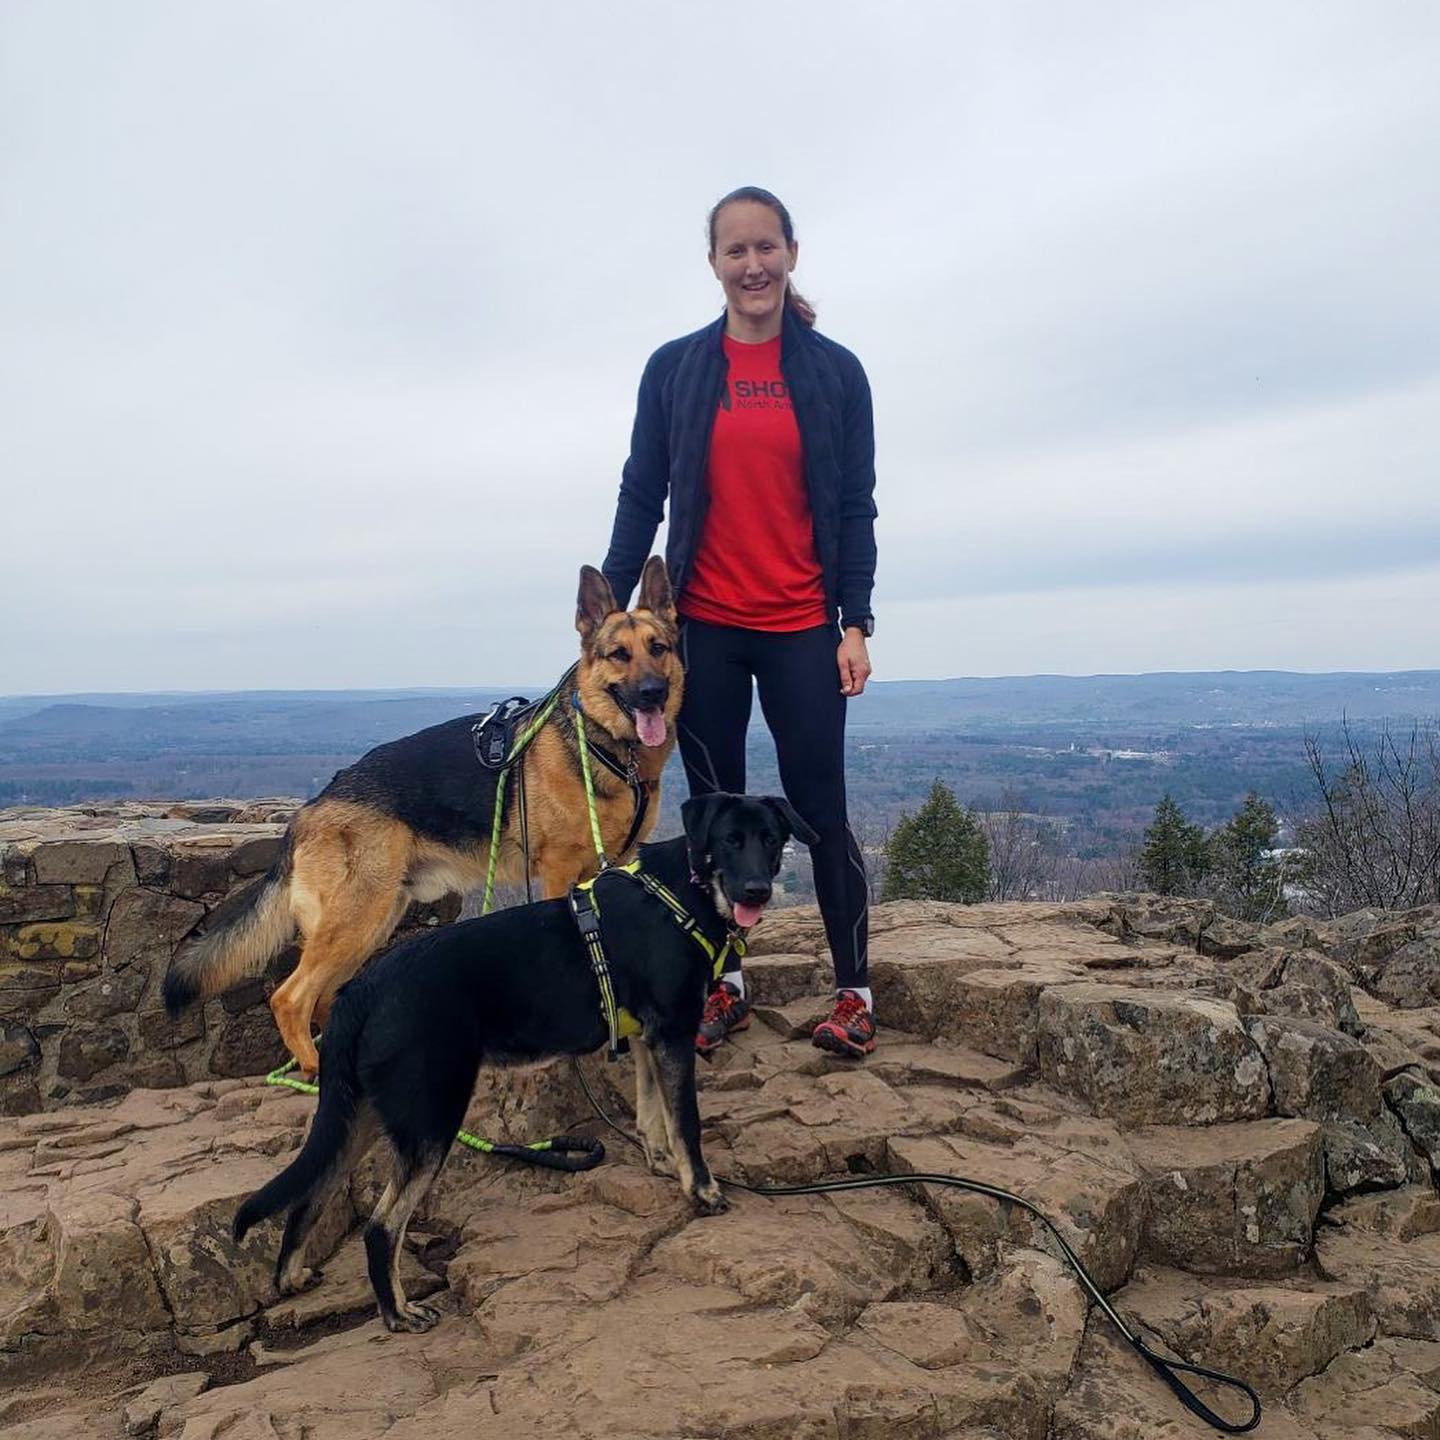 Lisa Wawrzynowski on mountain top with dogs in VJ Shoes XTRM and VJ Shoes tshirt